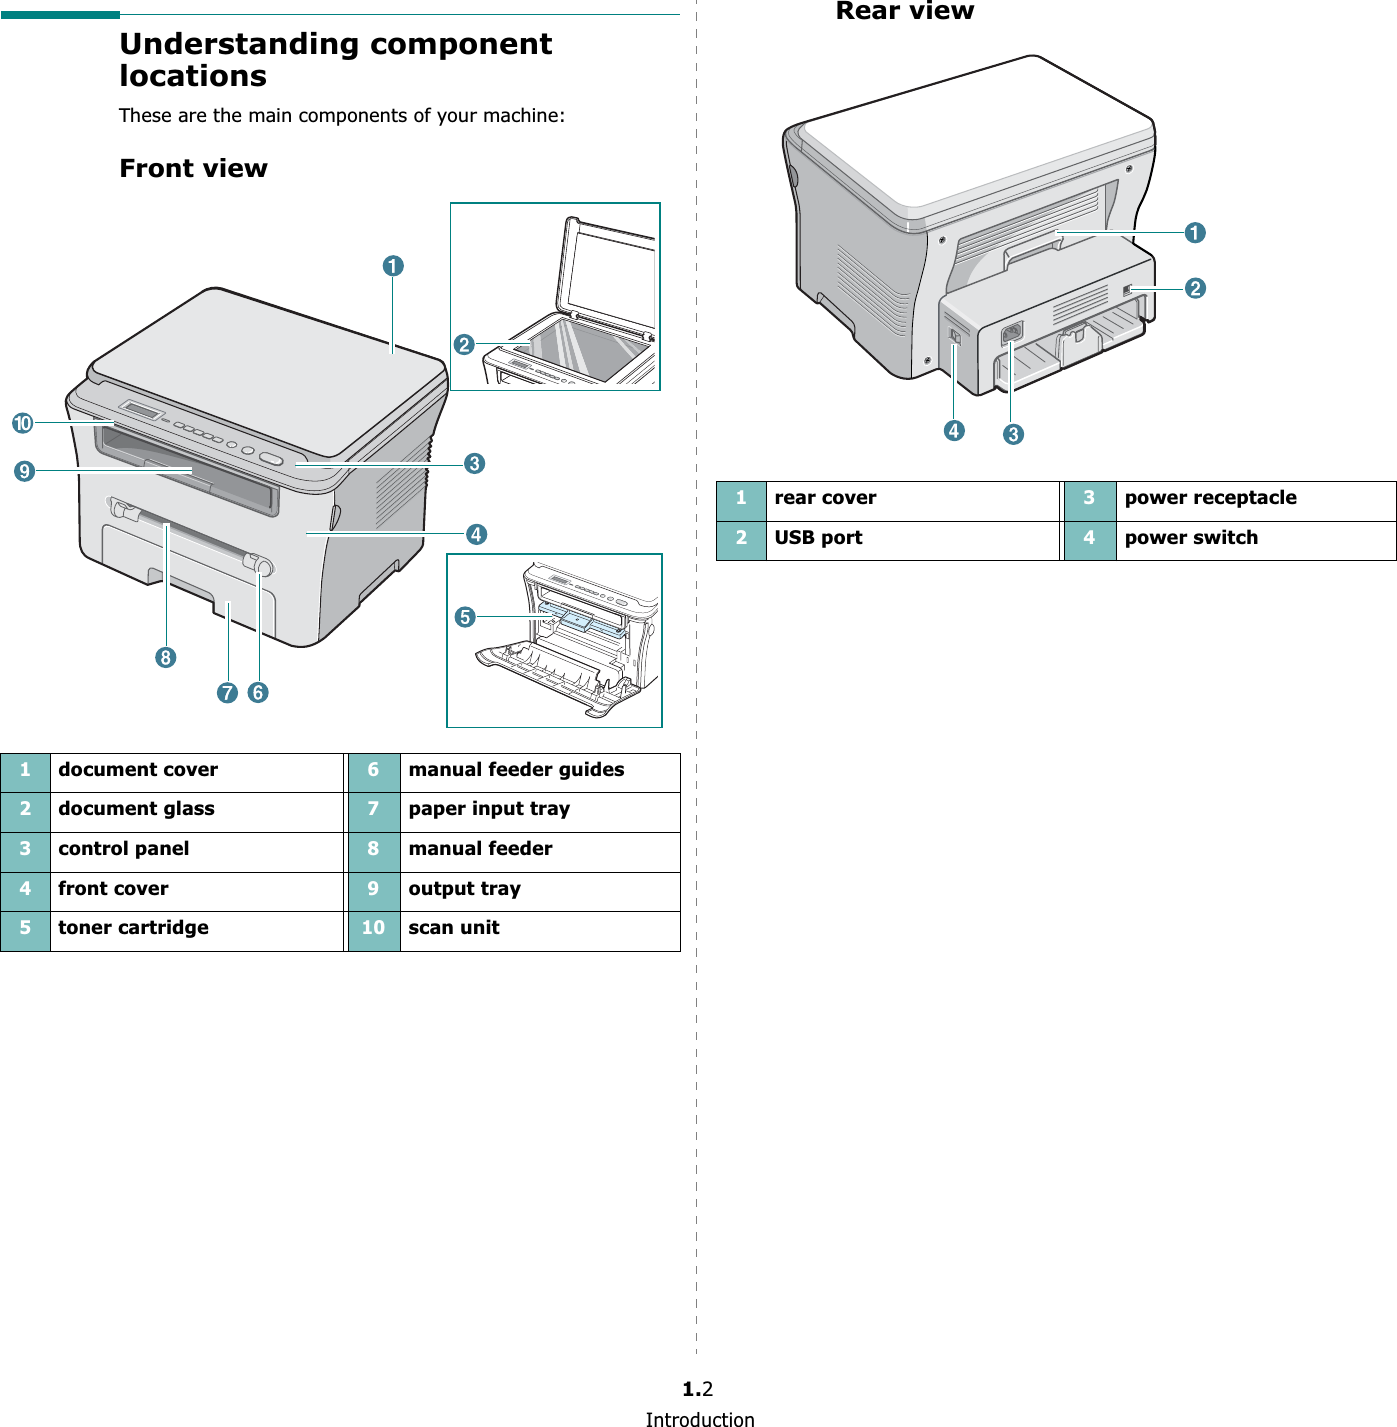 Introduction1.2Understanding component locationsThese are the main components of your machine:Front view1document cover6manual feeder guides2document glass7paper input tray3control panel8manual feeder4front cover9output tray5toner cartridge10scan unitRear view1rear cover3power receptacle2USB port4power switch